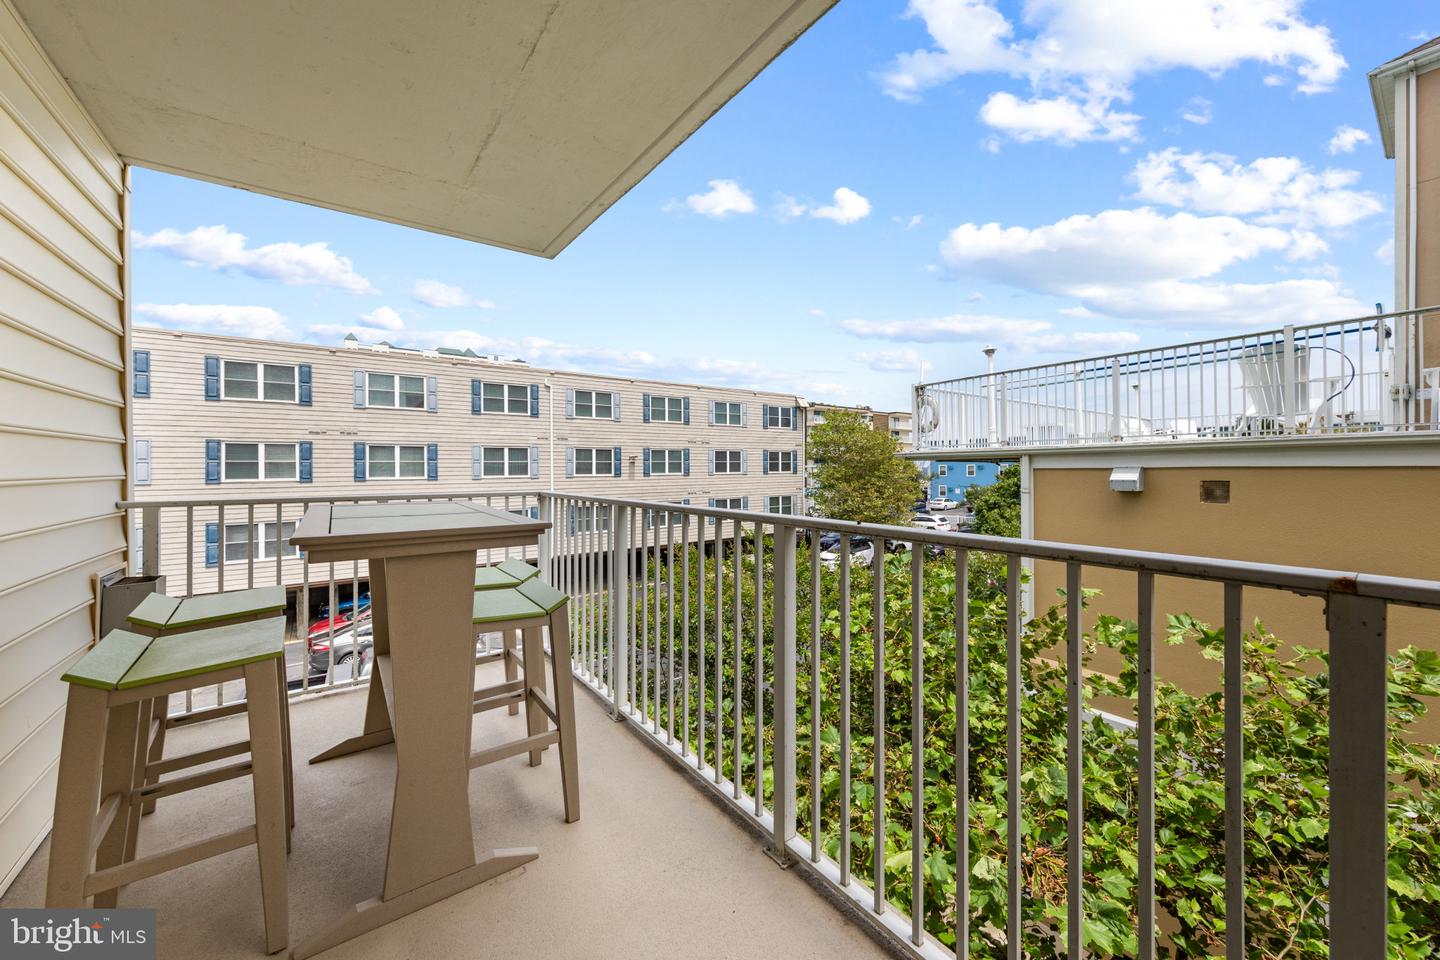 MDWO2015322-802498056096-2024-04-16-15-31-31 14 45th St #203 | Ocean City, MD Real Estate For Sale | MLS# Mdwo2015322  - 1st Choice Properties